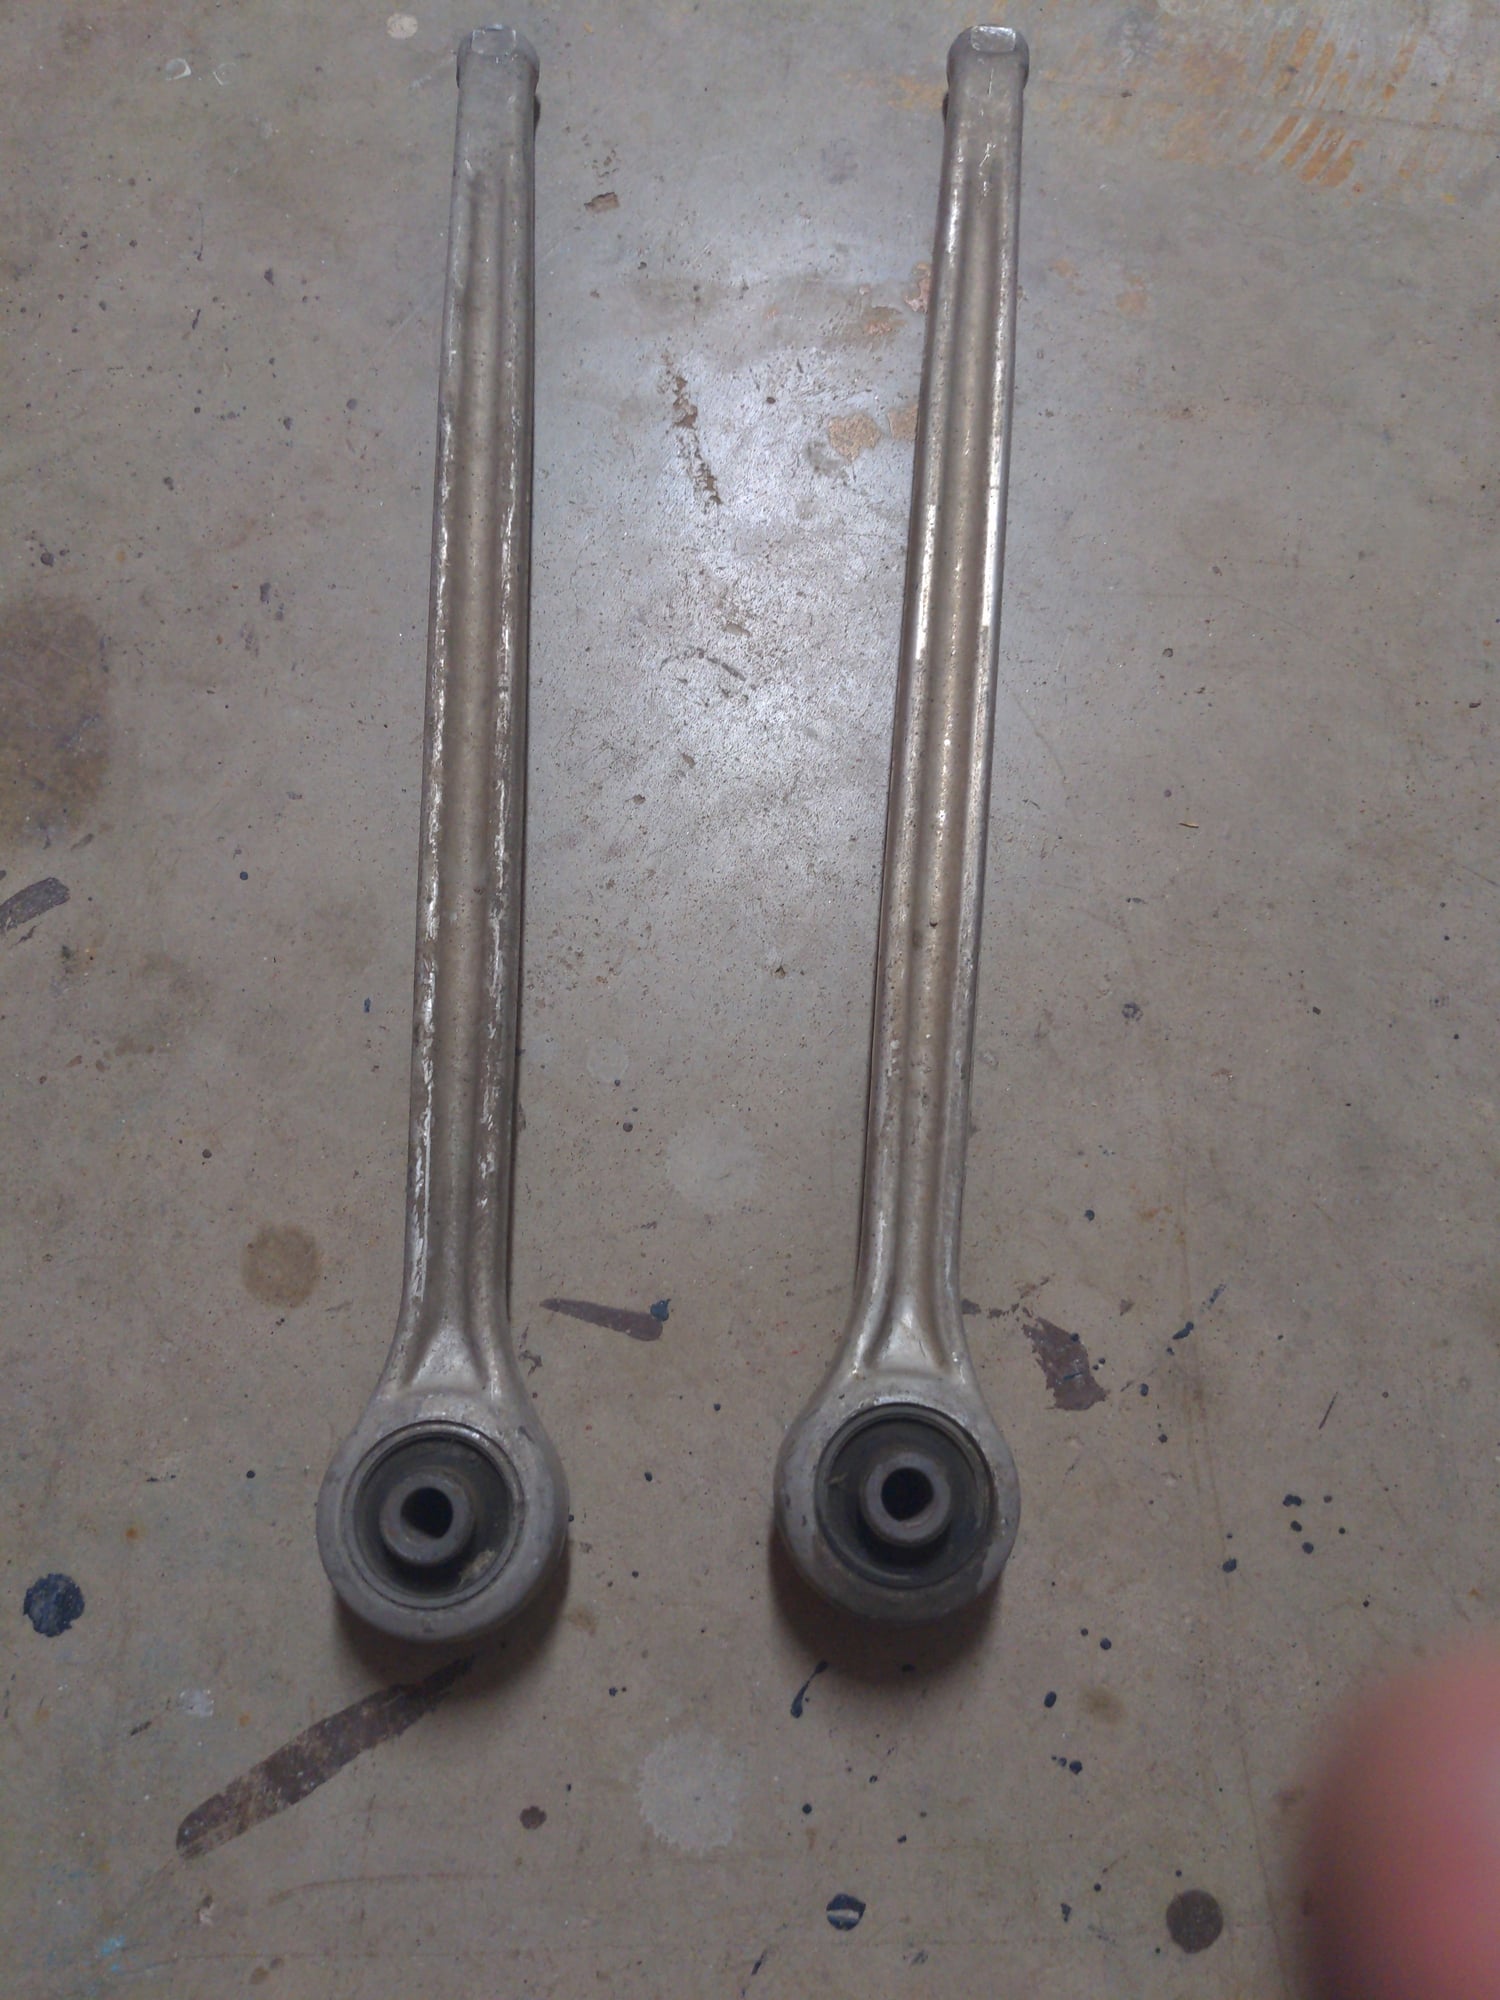 1993 Mazda RX-7 - 2x Trailing Arms - Steering/Suspension - $120 - Austin, TX 78759, United States